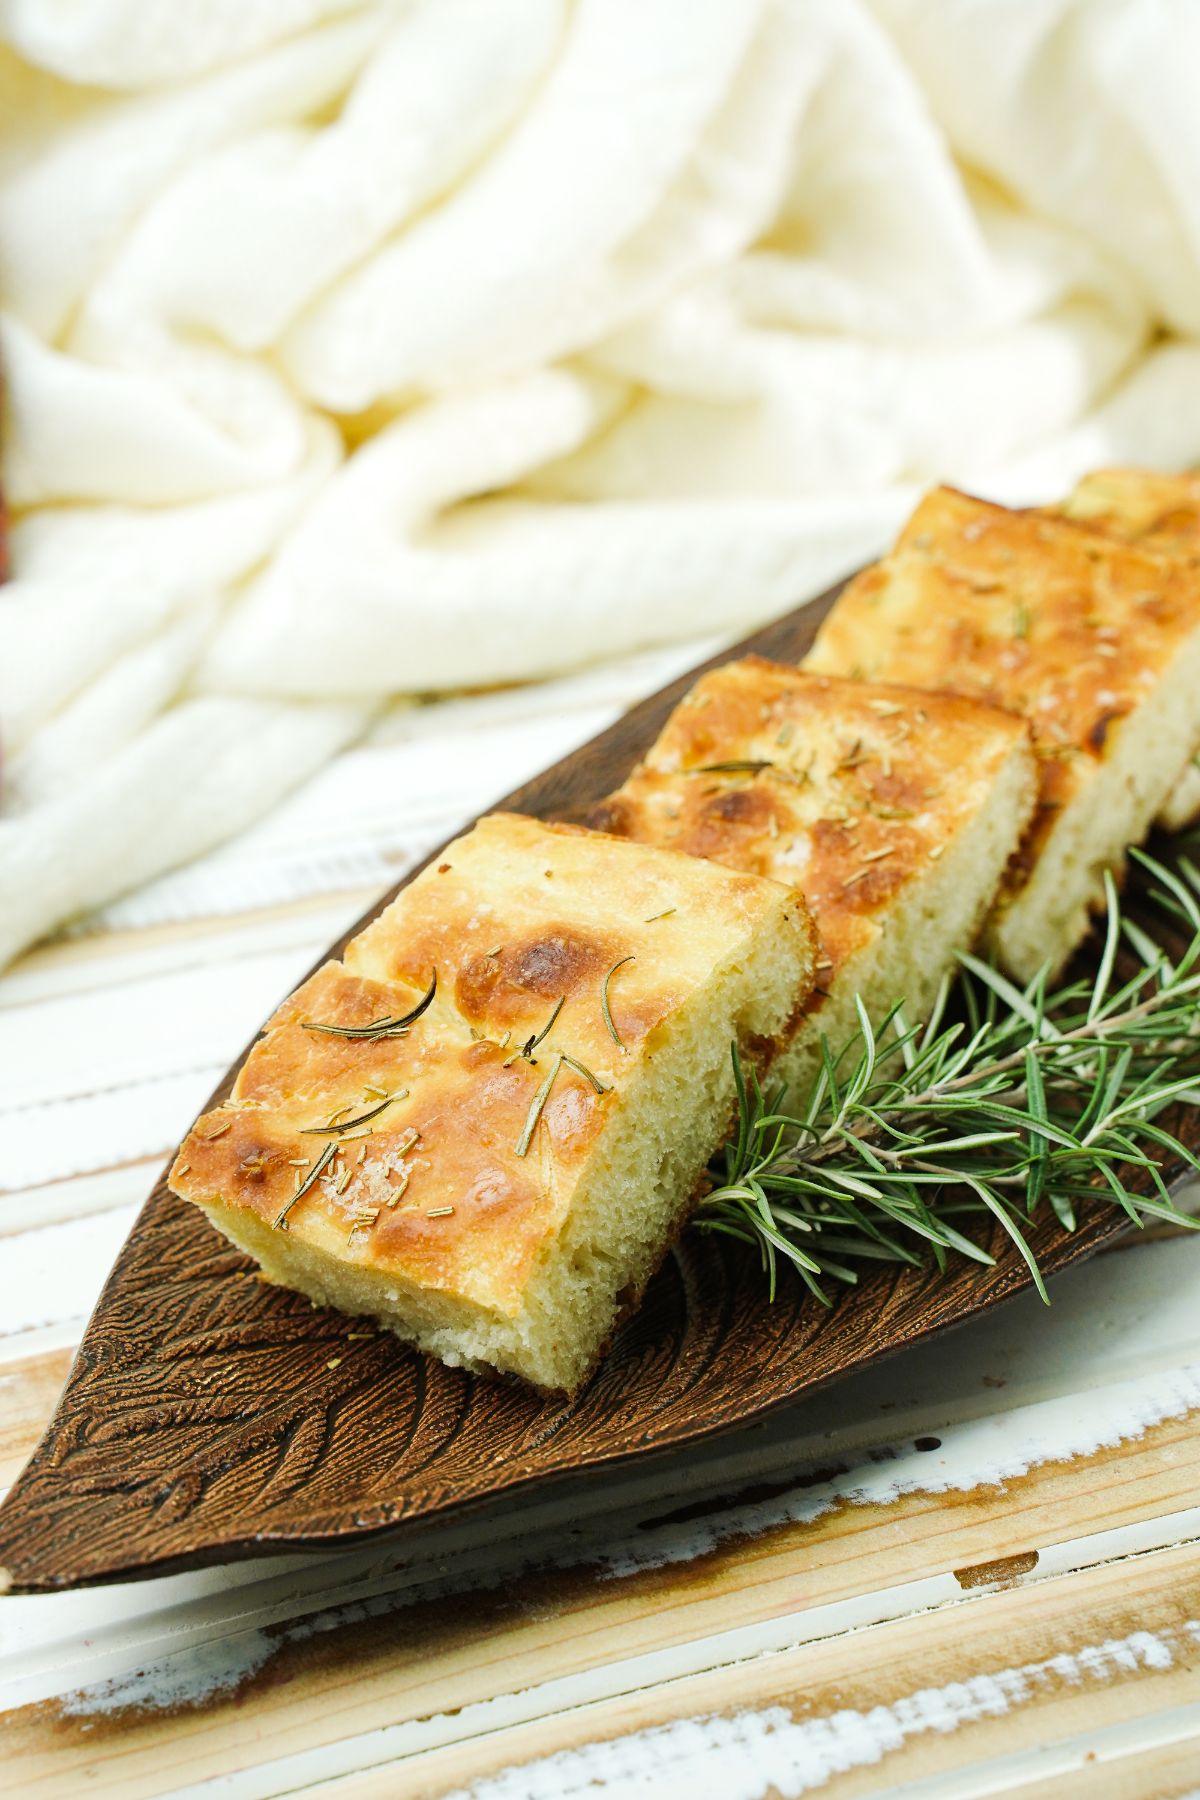 brown platter holding sliced bread with rosemary sprig on the side